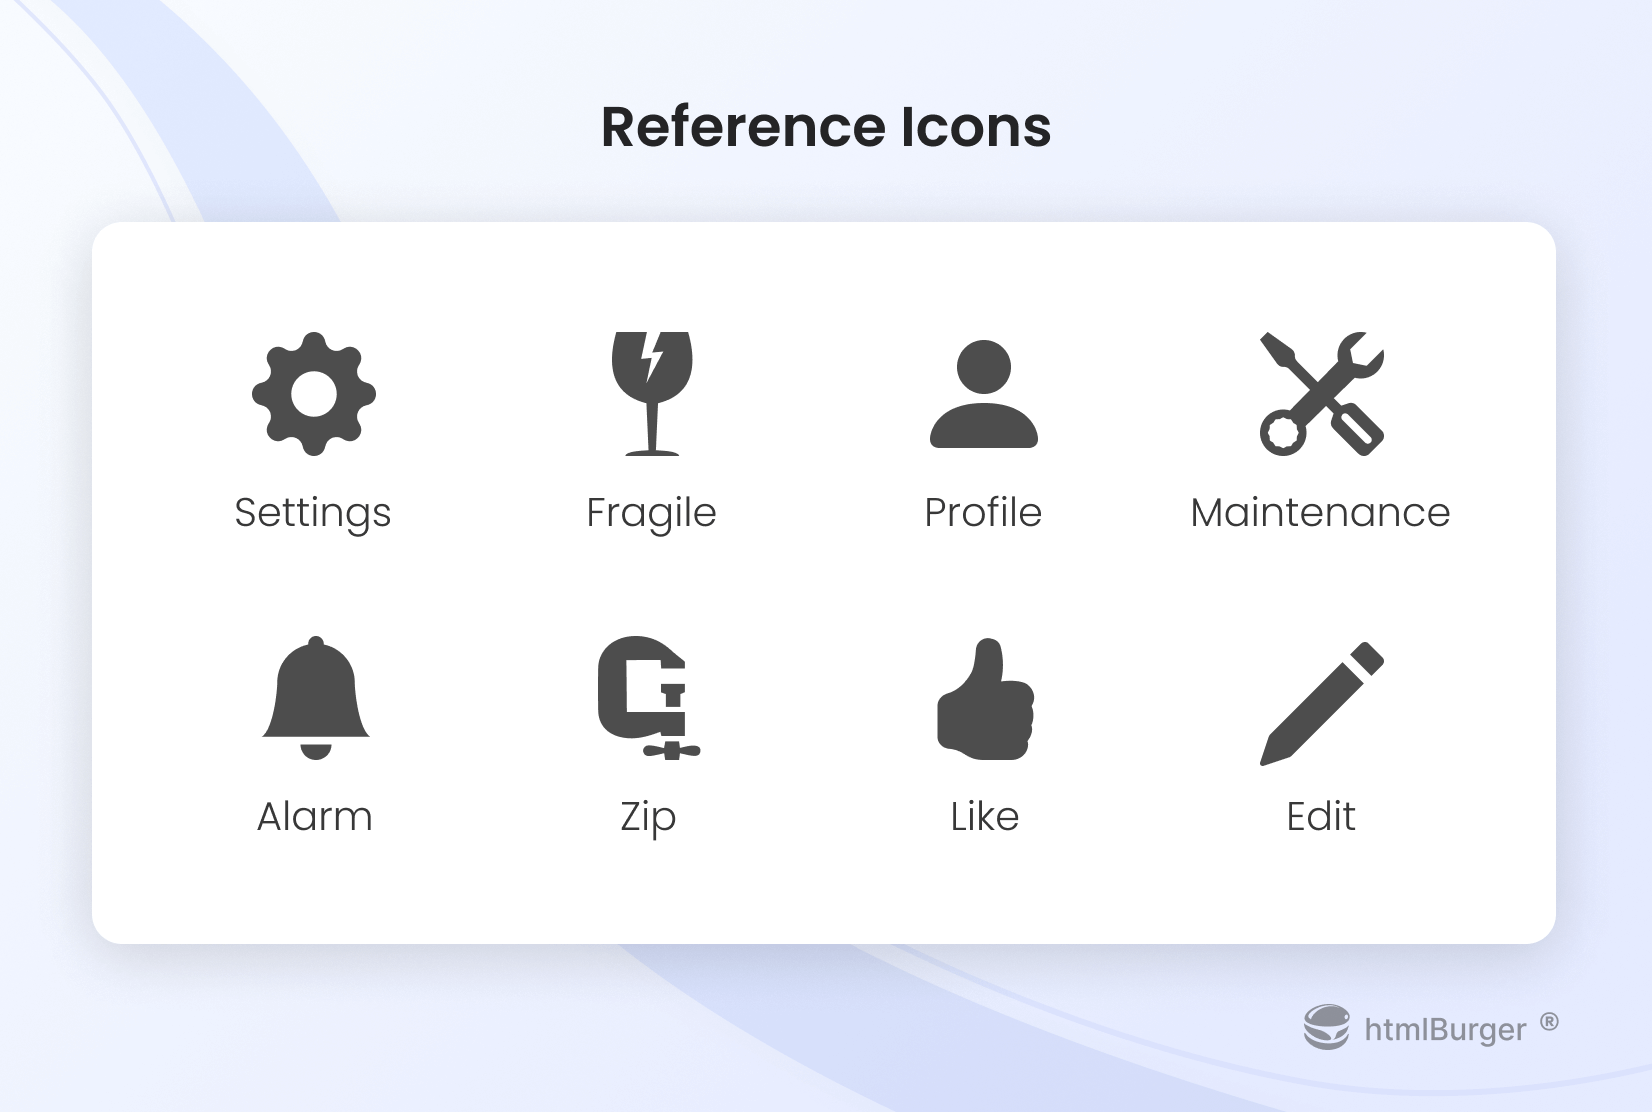 UI cheat sheet: Icon categories + icon style reference guide